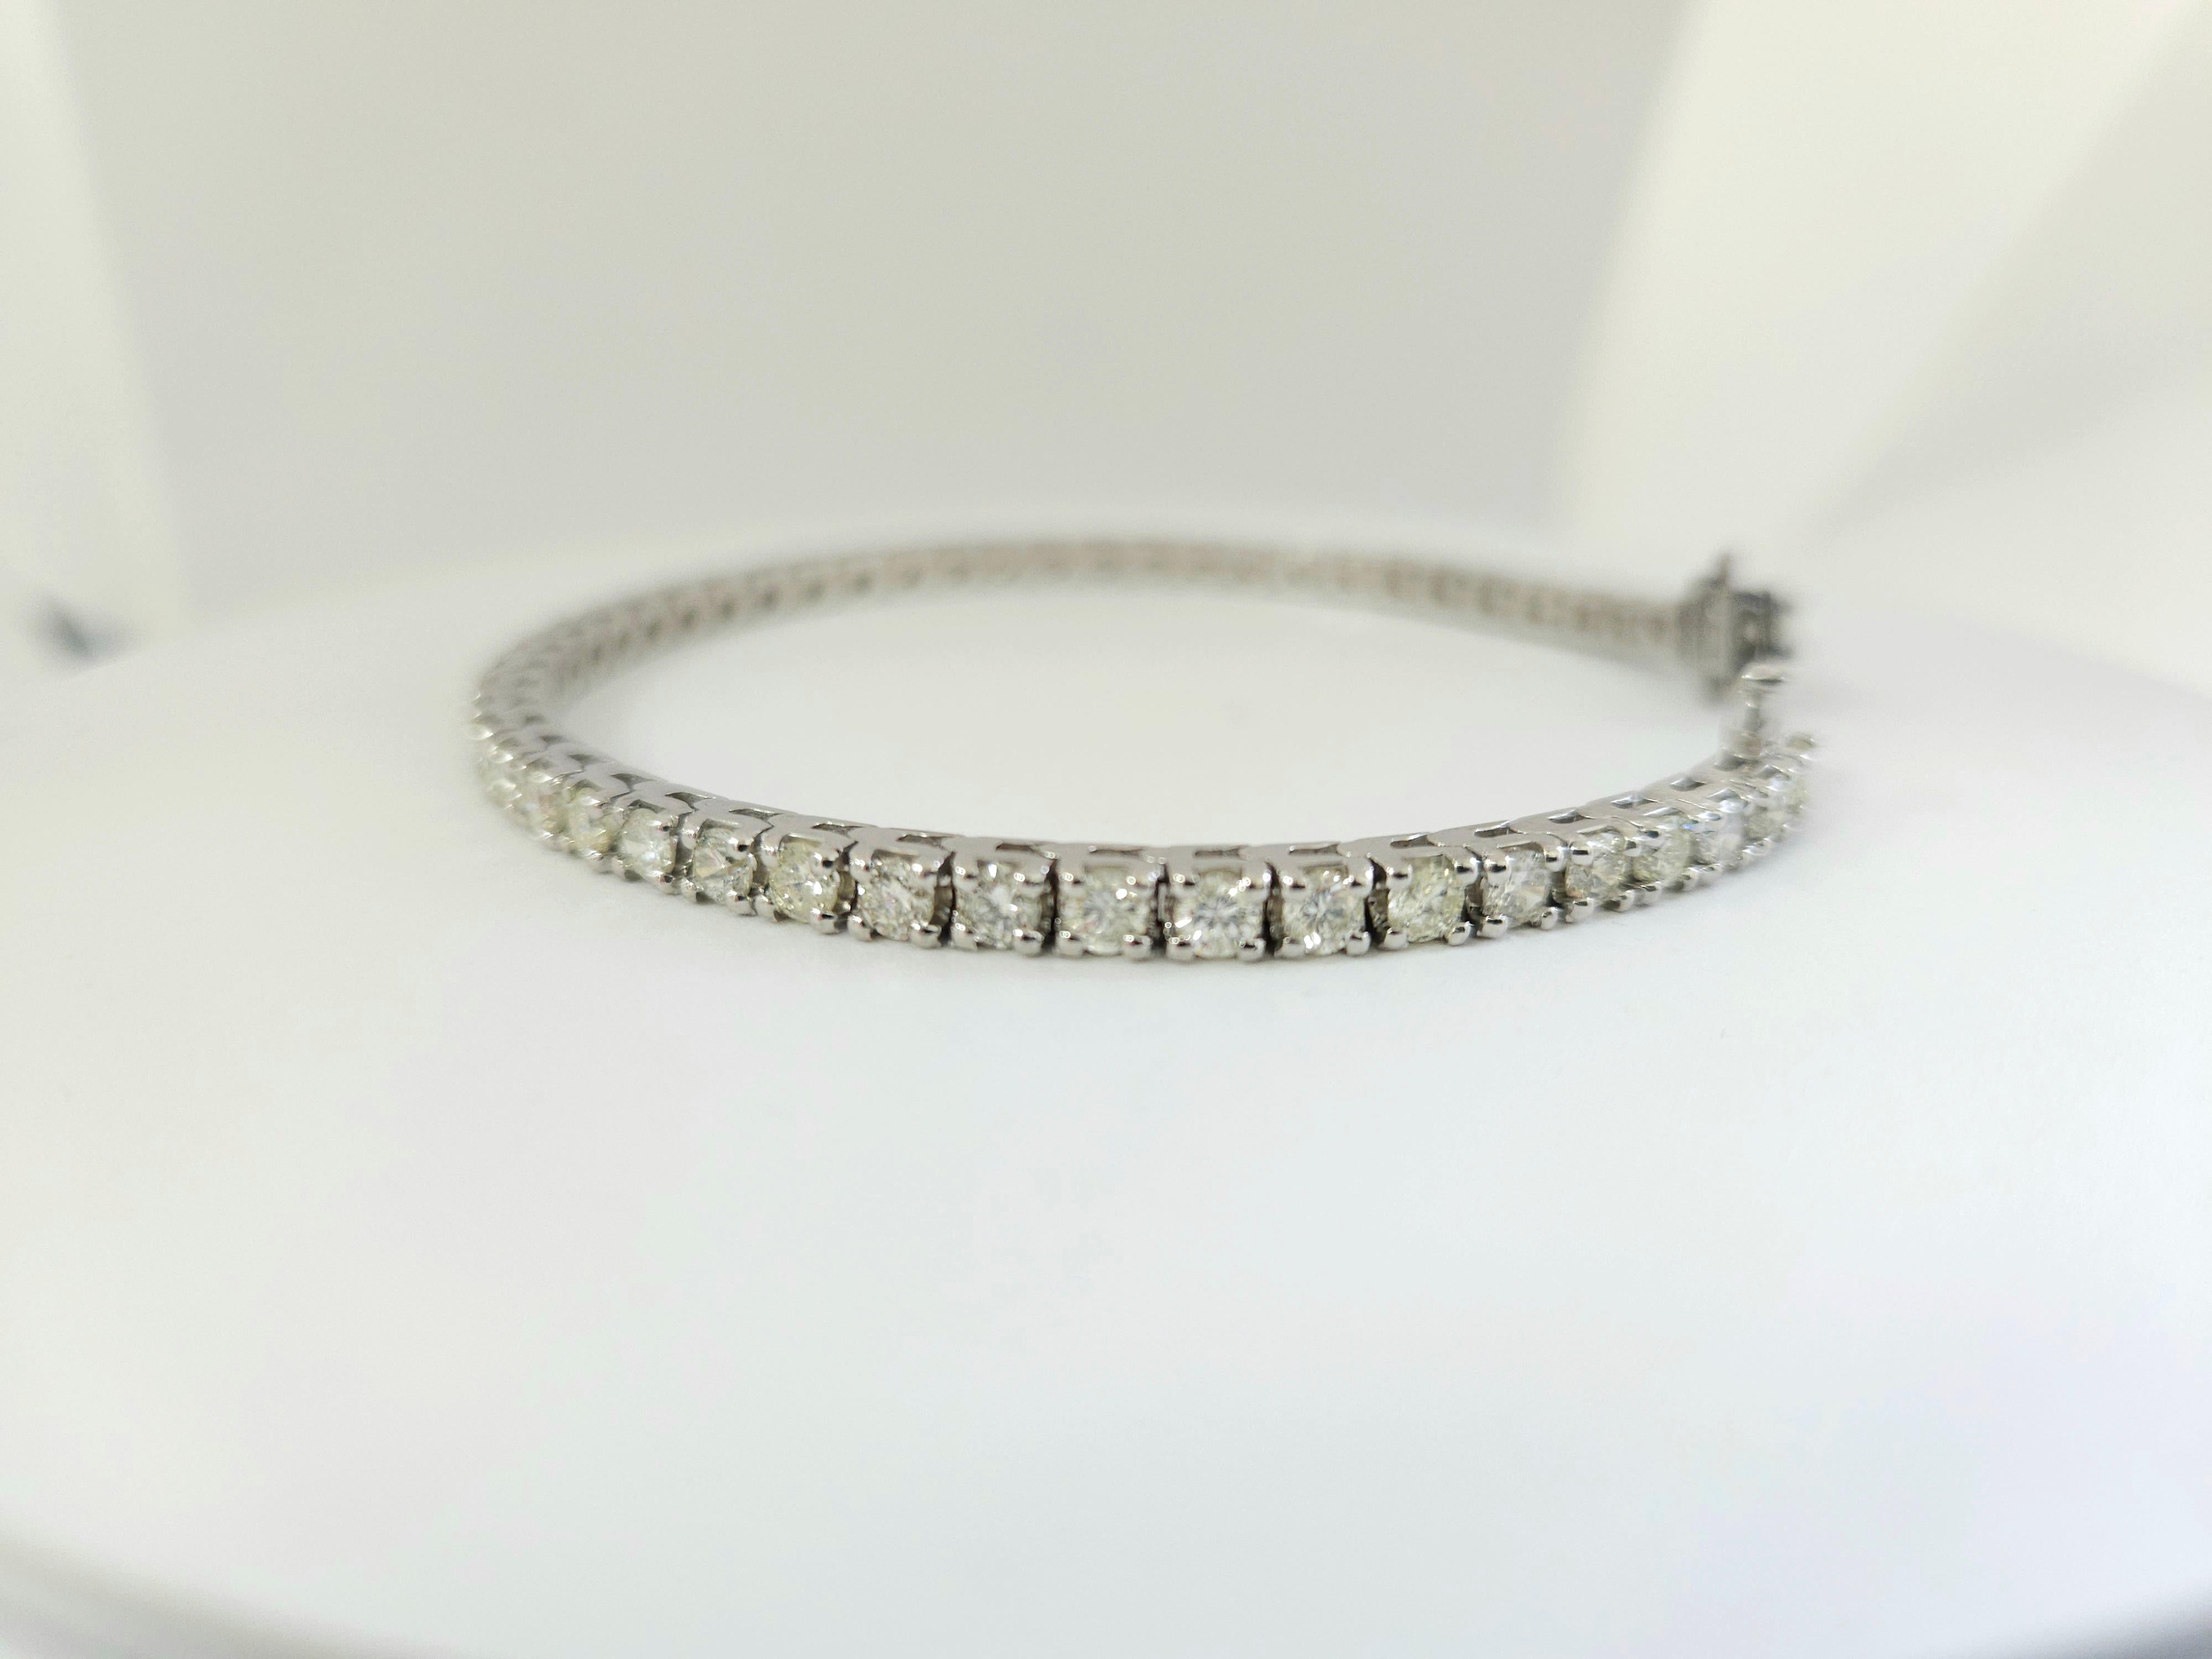 Natural diamonds tennis bracelet round-brilliant cut  14k white gold. 
7 inch. Average Color J, Clarity I 3.20 mm wide,50 pcs, 12.84 grams very shiny don't miss.

*Free shipping within U.S*

